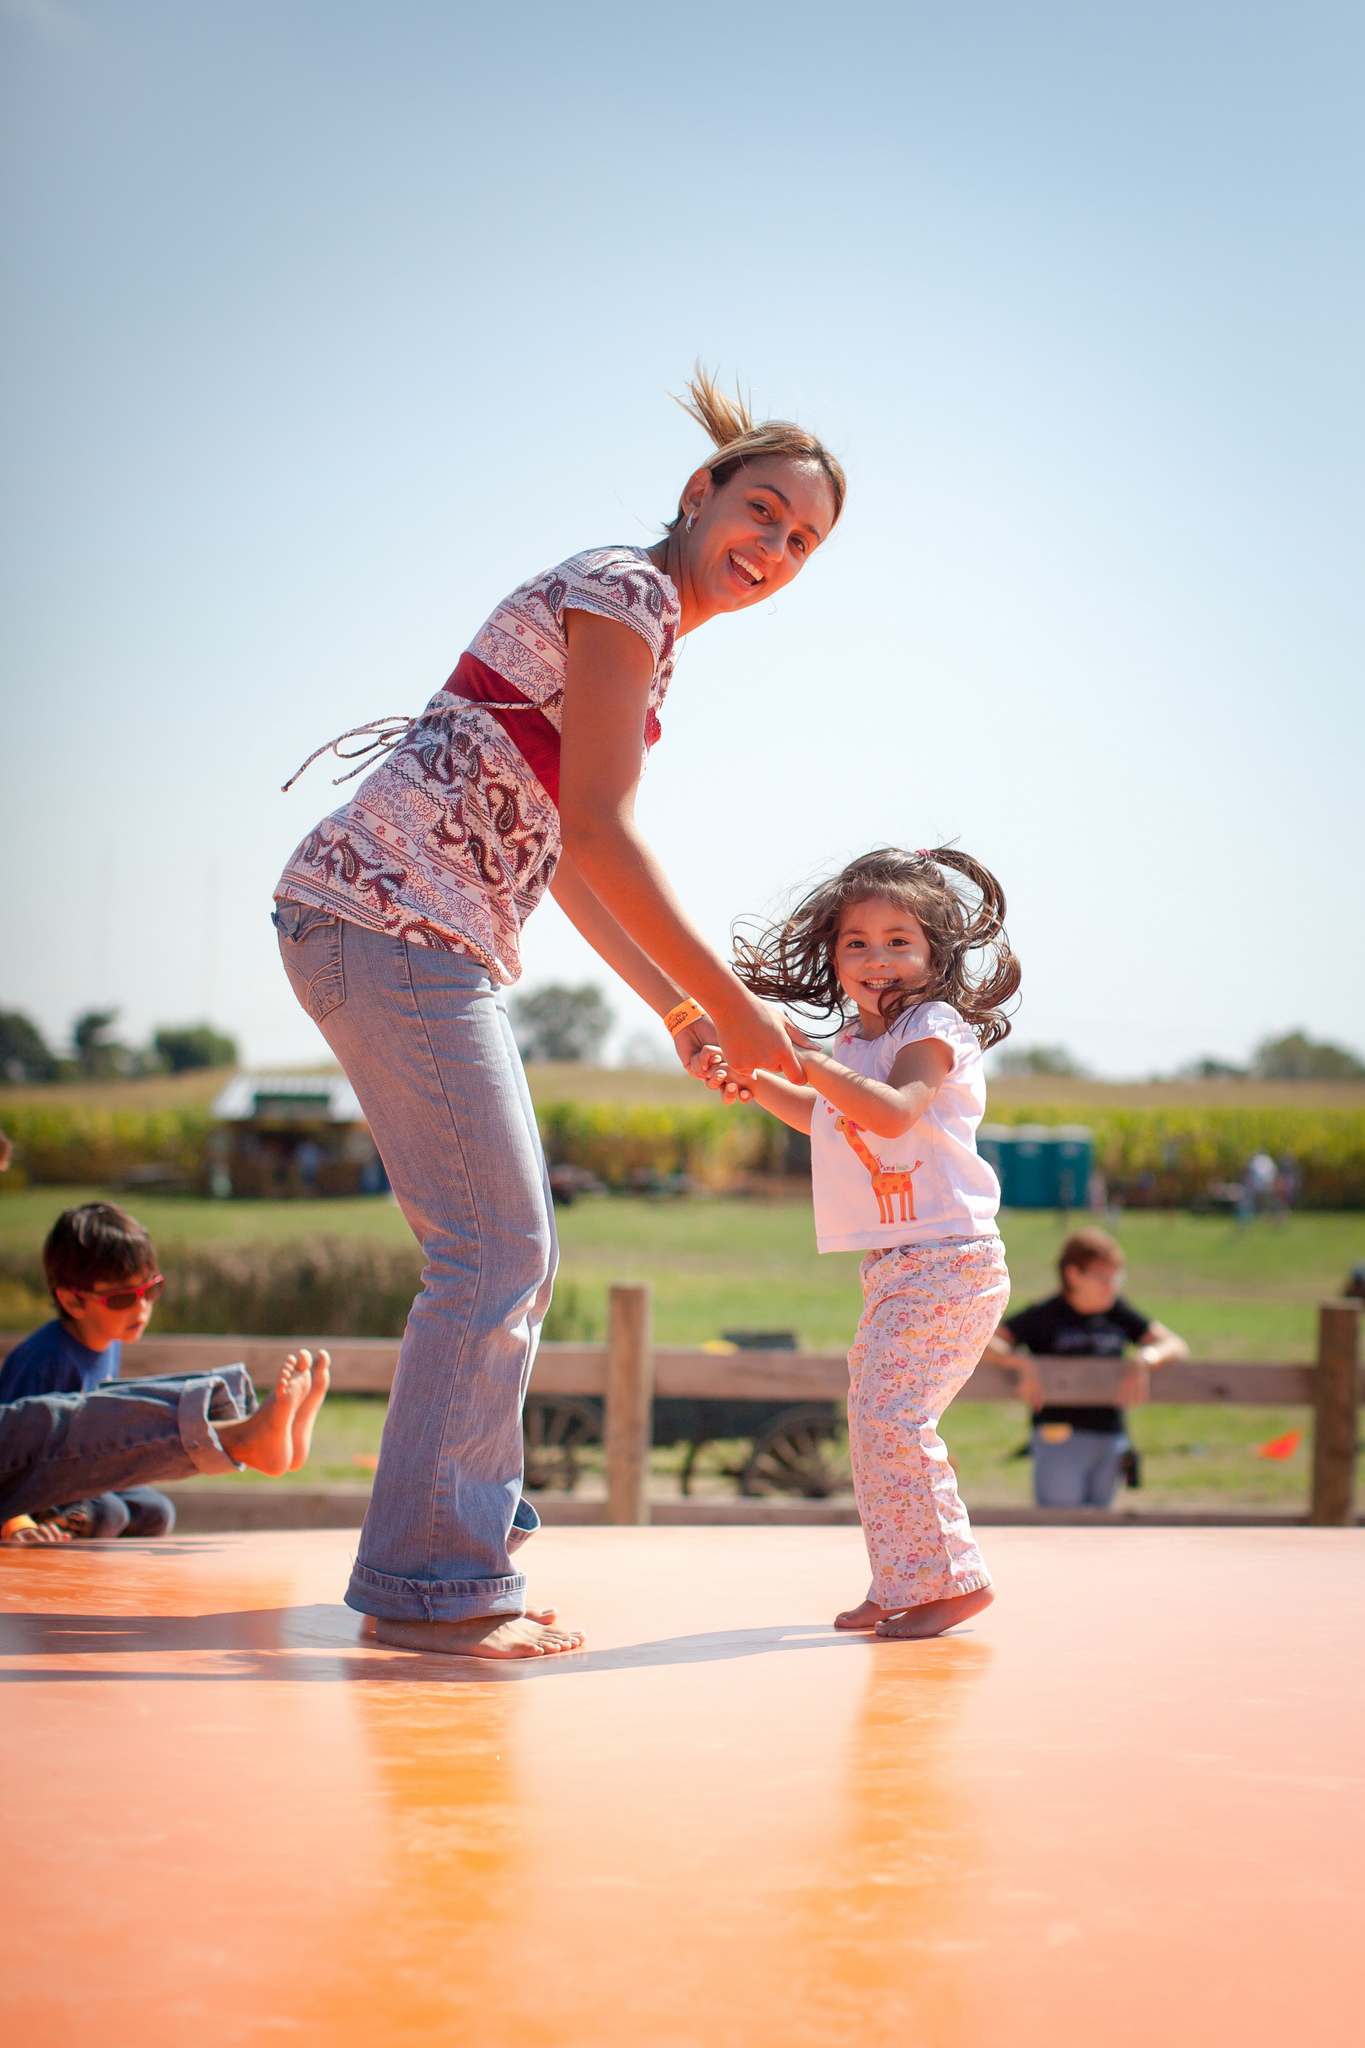 Gigantic Jumping Pillows, Old-Fashioned Hayrides to the Pumpkin Patch, Pig Races, and more await visitors this fall to Summers Farm.